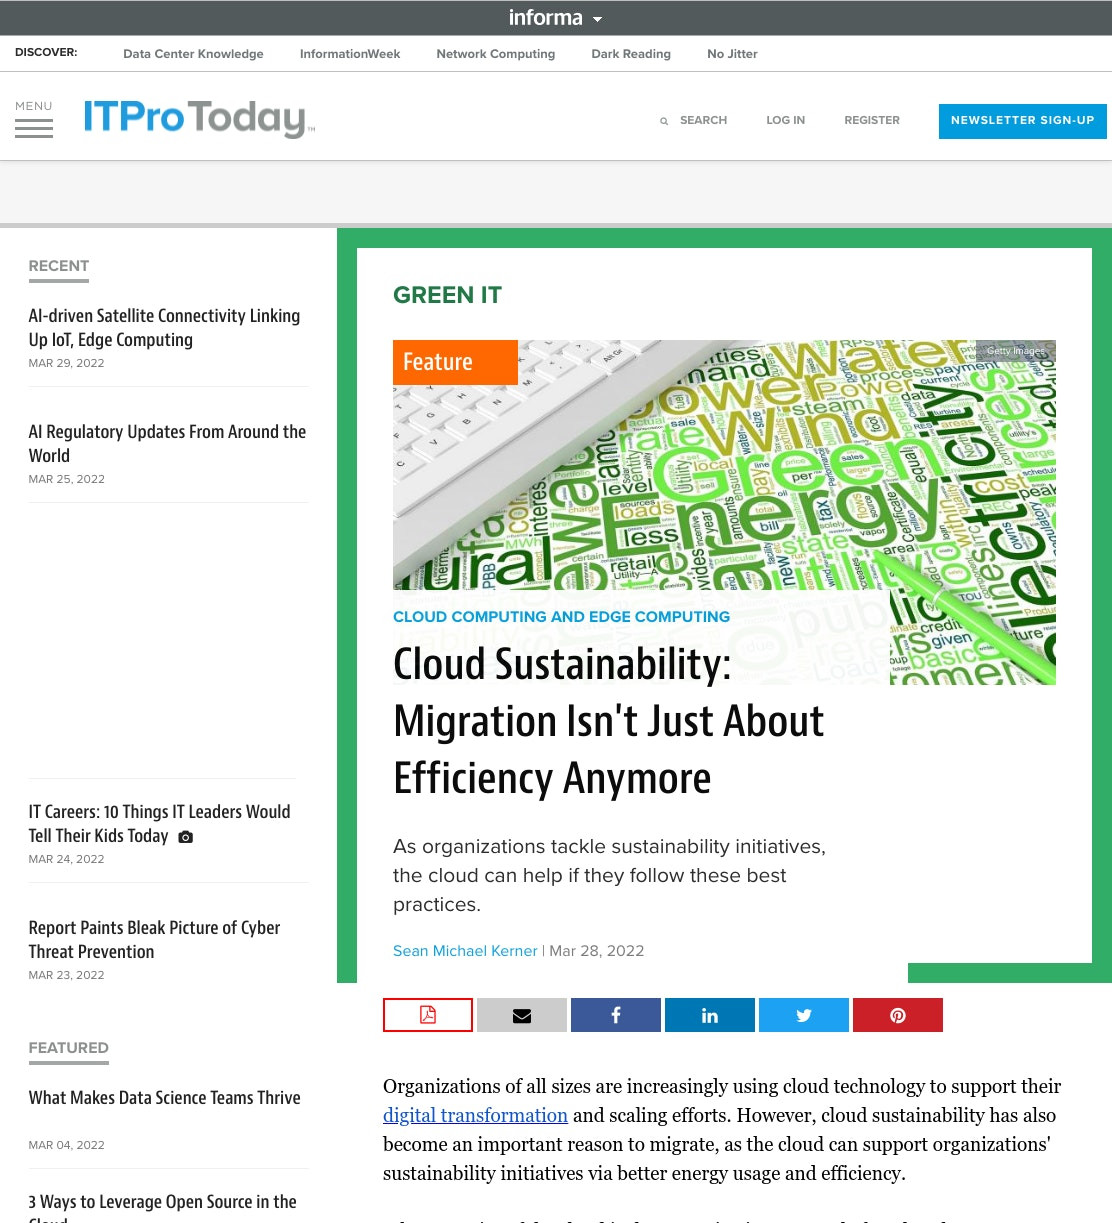 Cloud Sustainability: Migration Isn’t Just About Efficiency Anymore